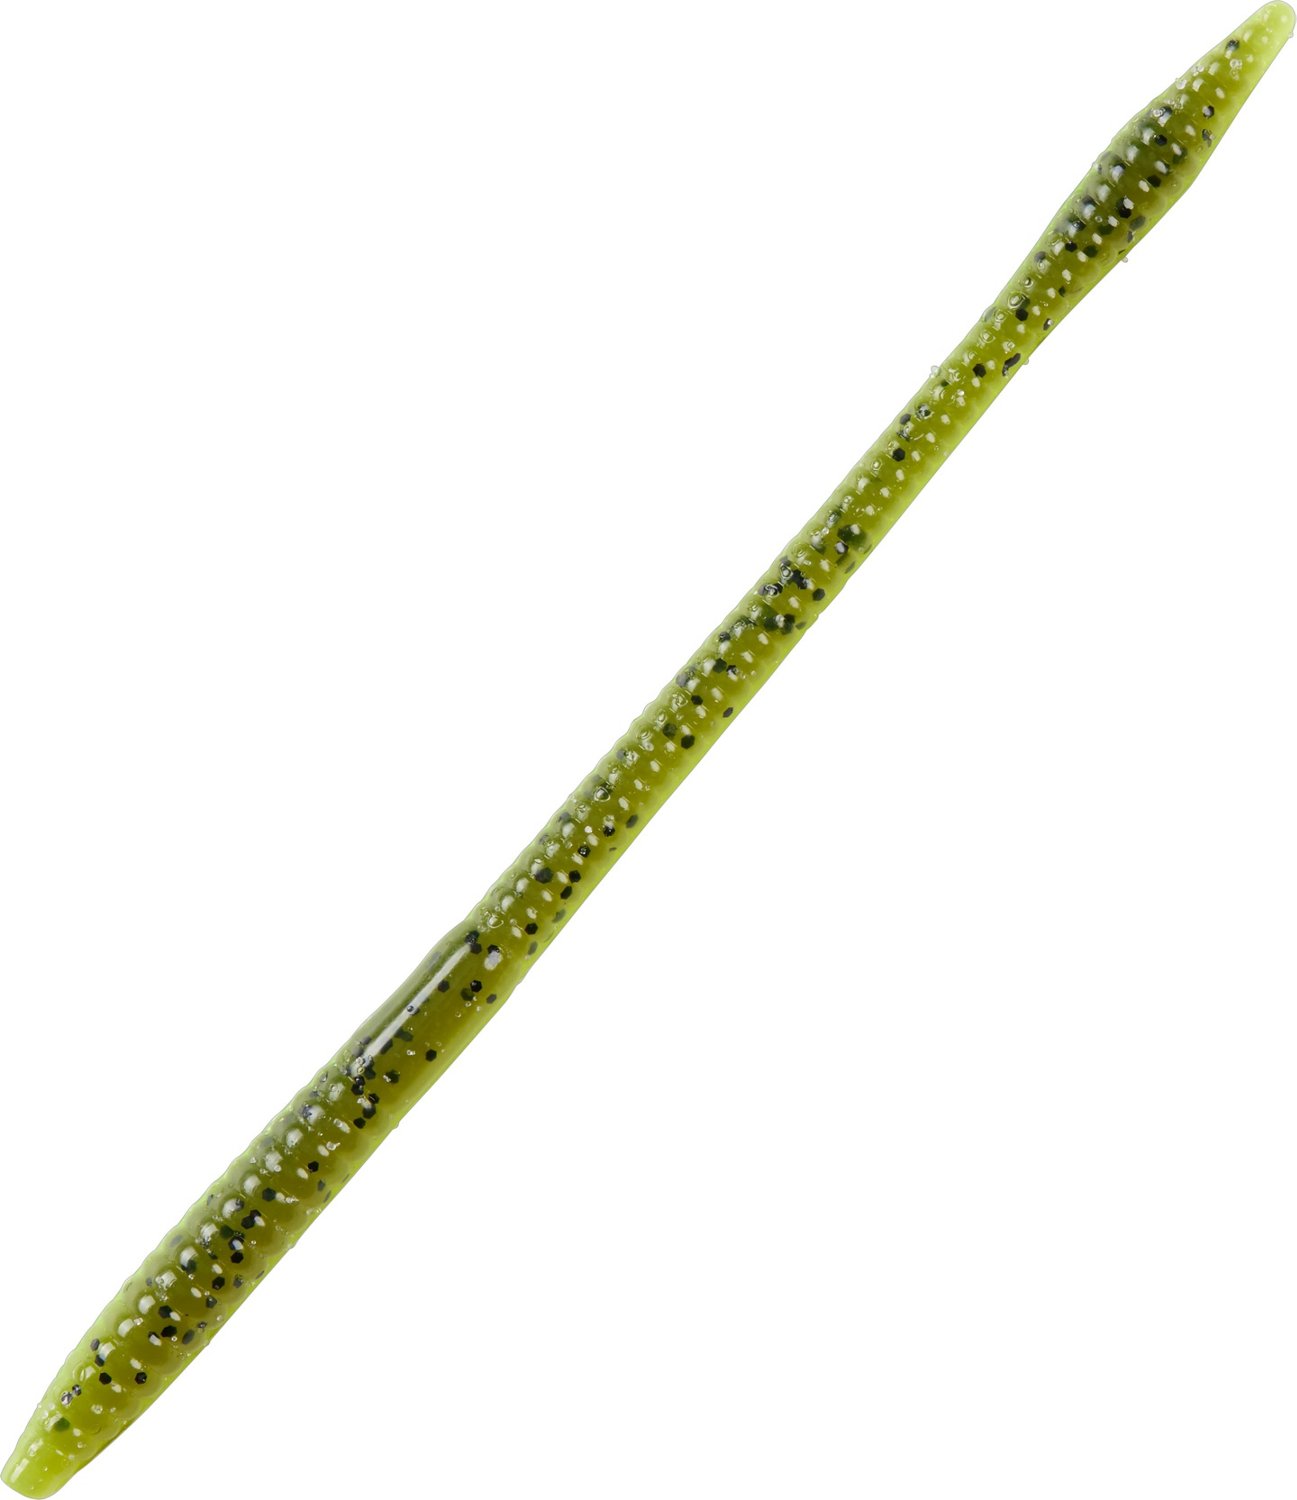 H2OX 6 inch Straight Tail Worm 12 Pack